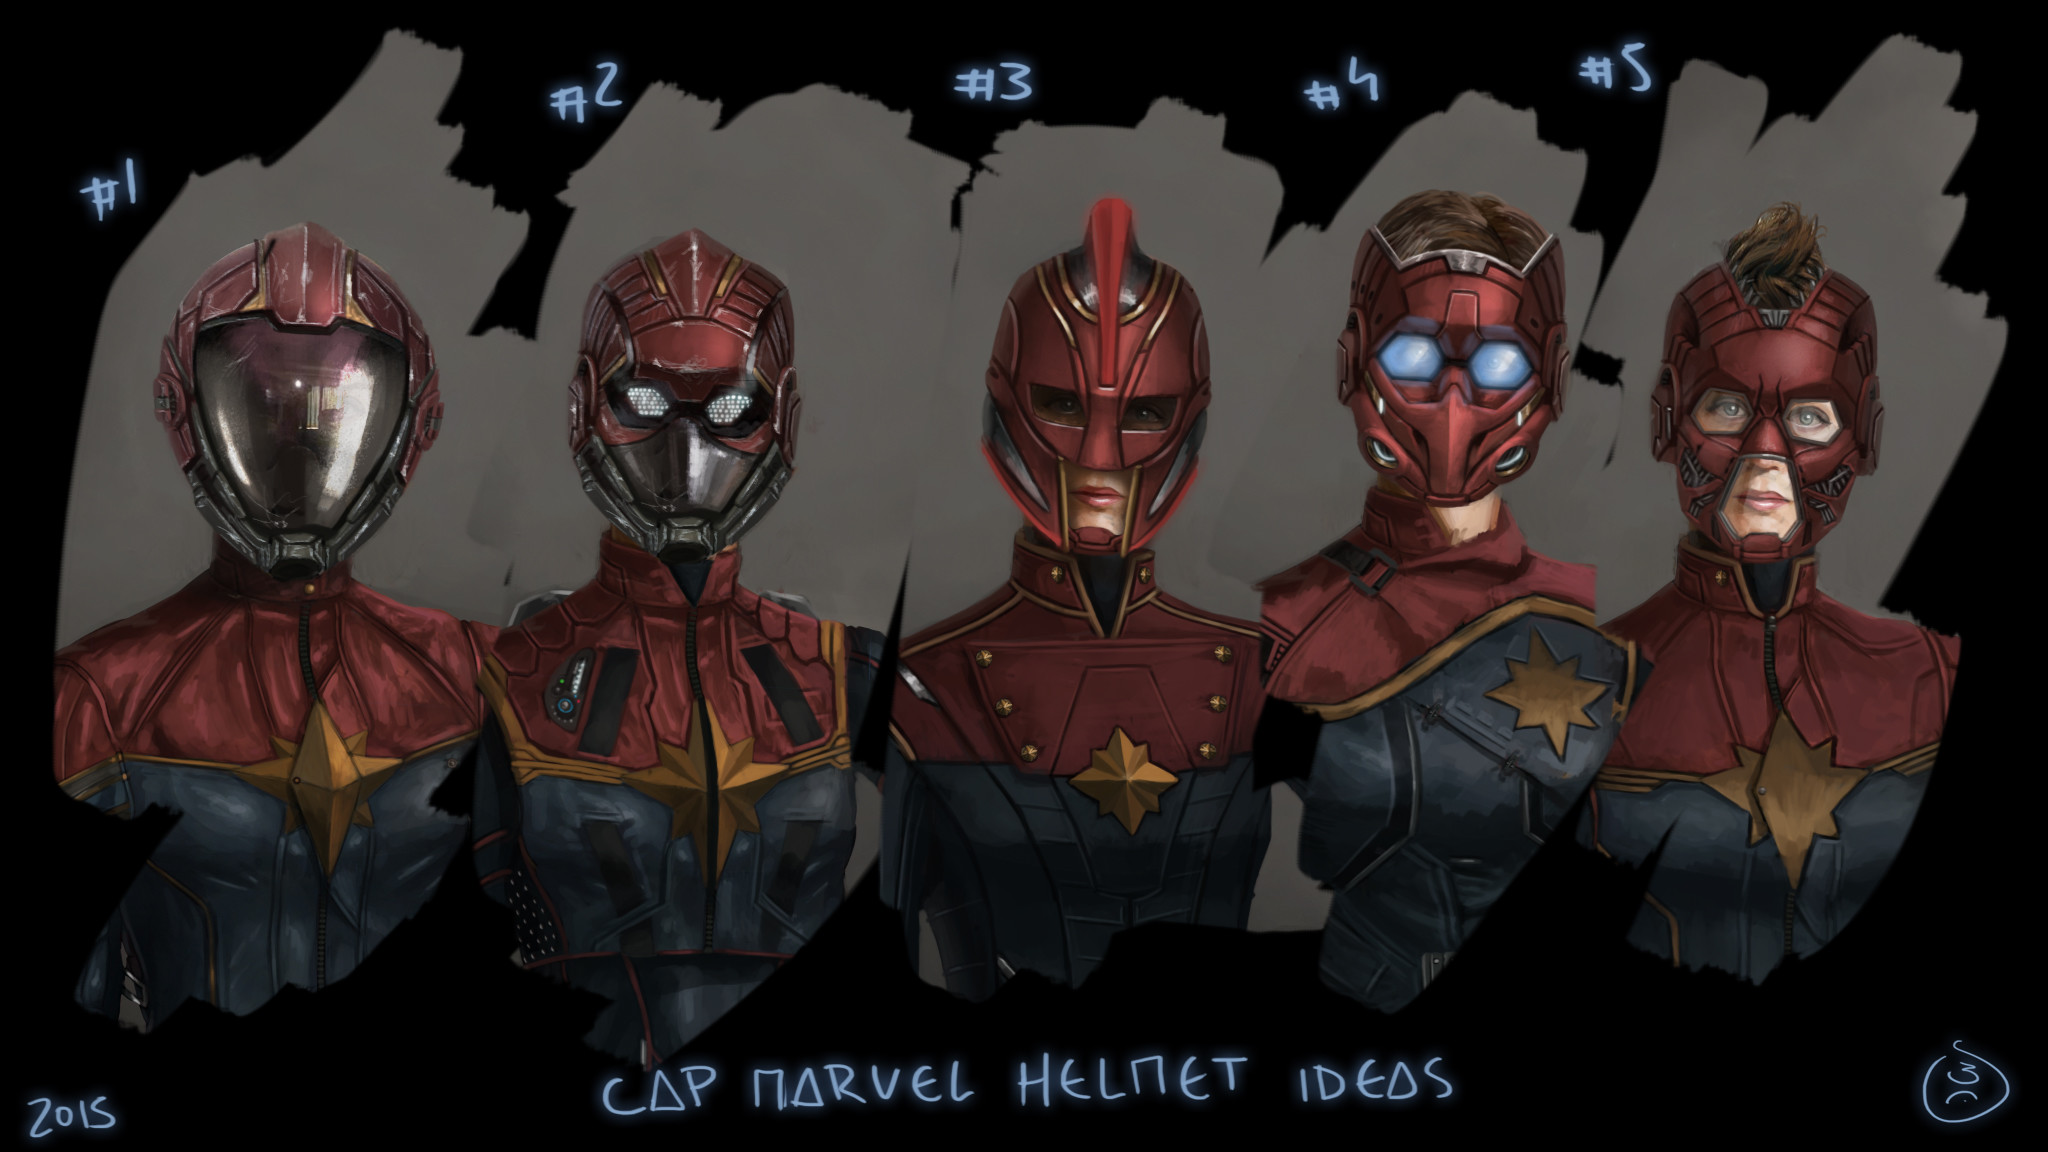 2048x1152 ... Some ideas for Captain Marvel's helmet for the mcu by wako88